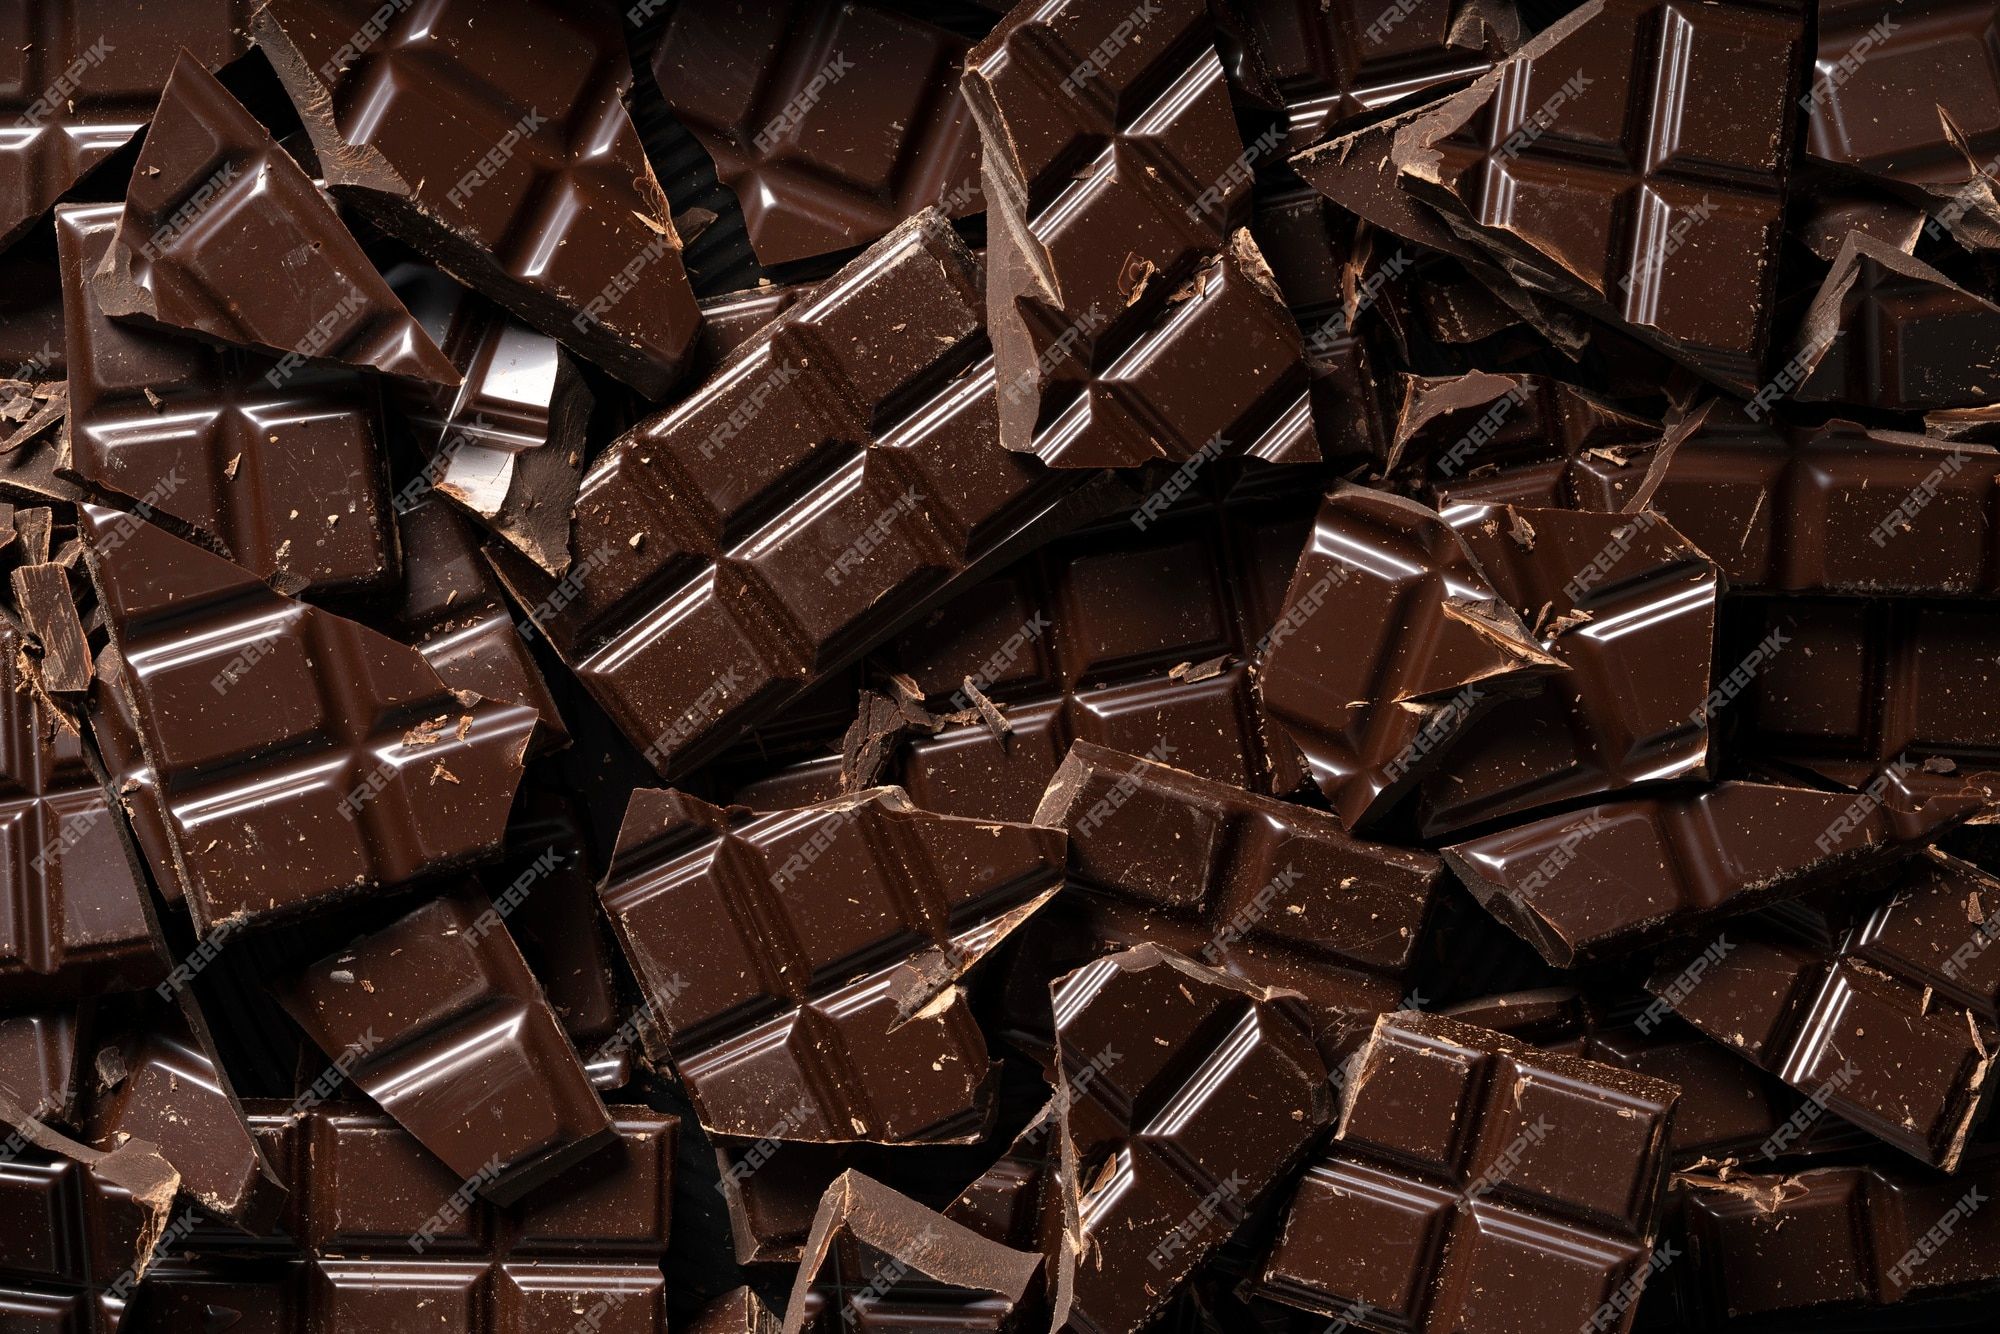 Chocolate bars crushed and broken on a black background - Chocolate